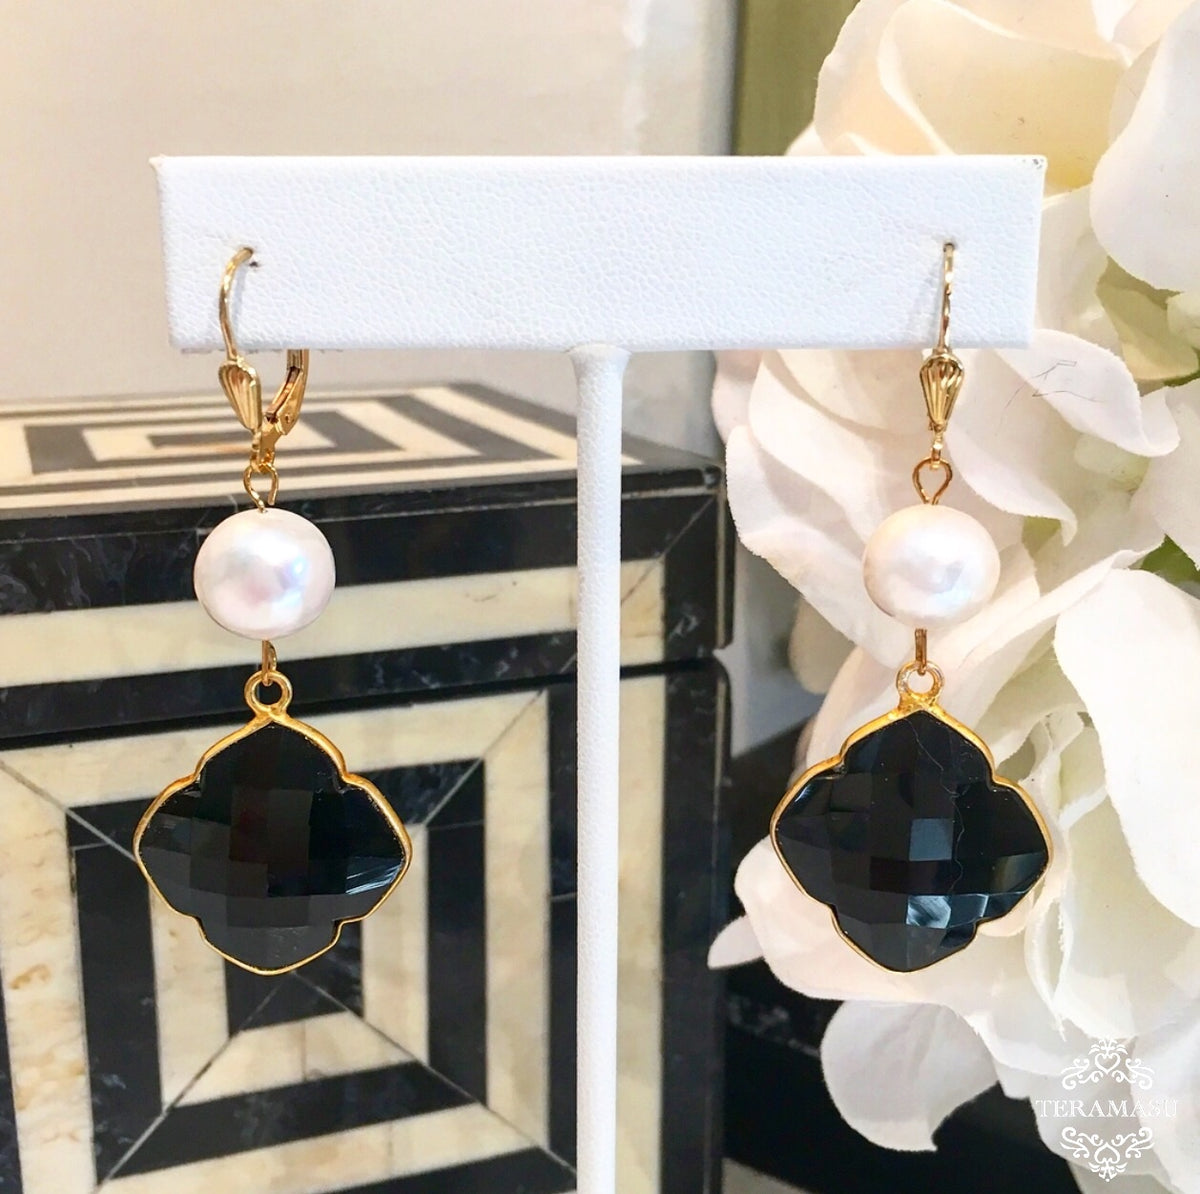 Chic Peek: The Perfect Classic Black and White Statement Earring from Teramasu